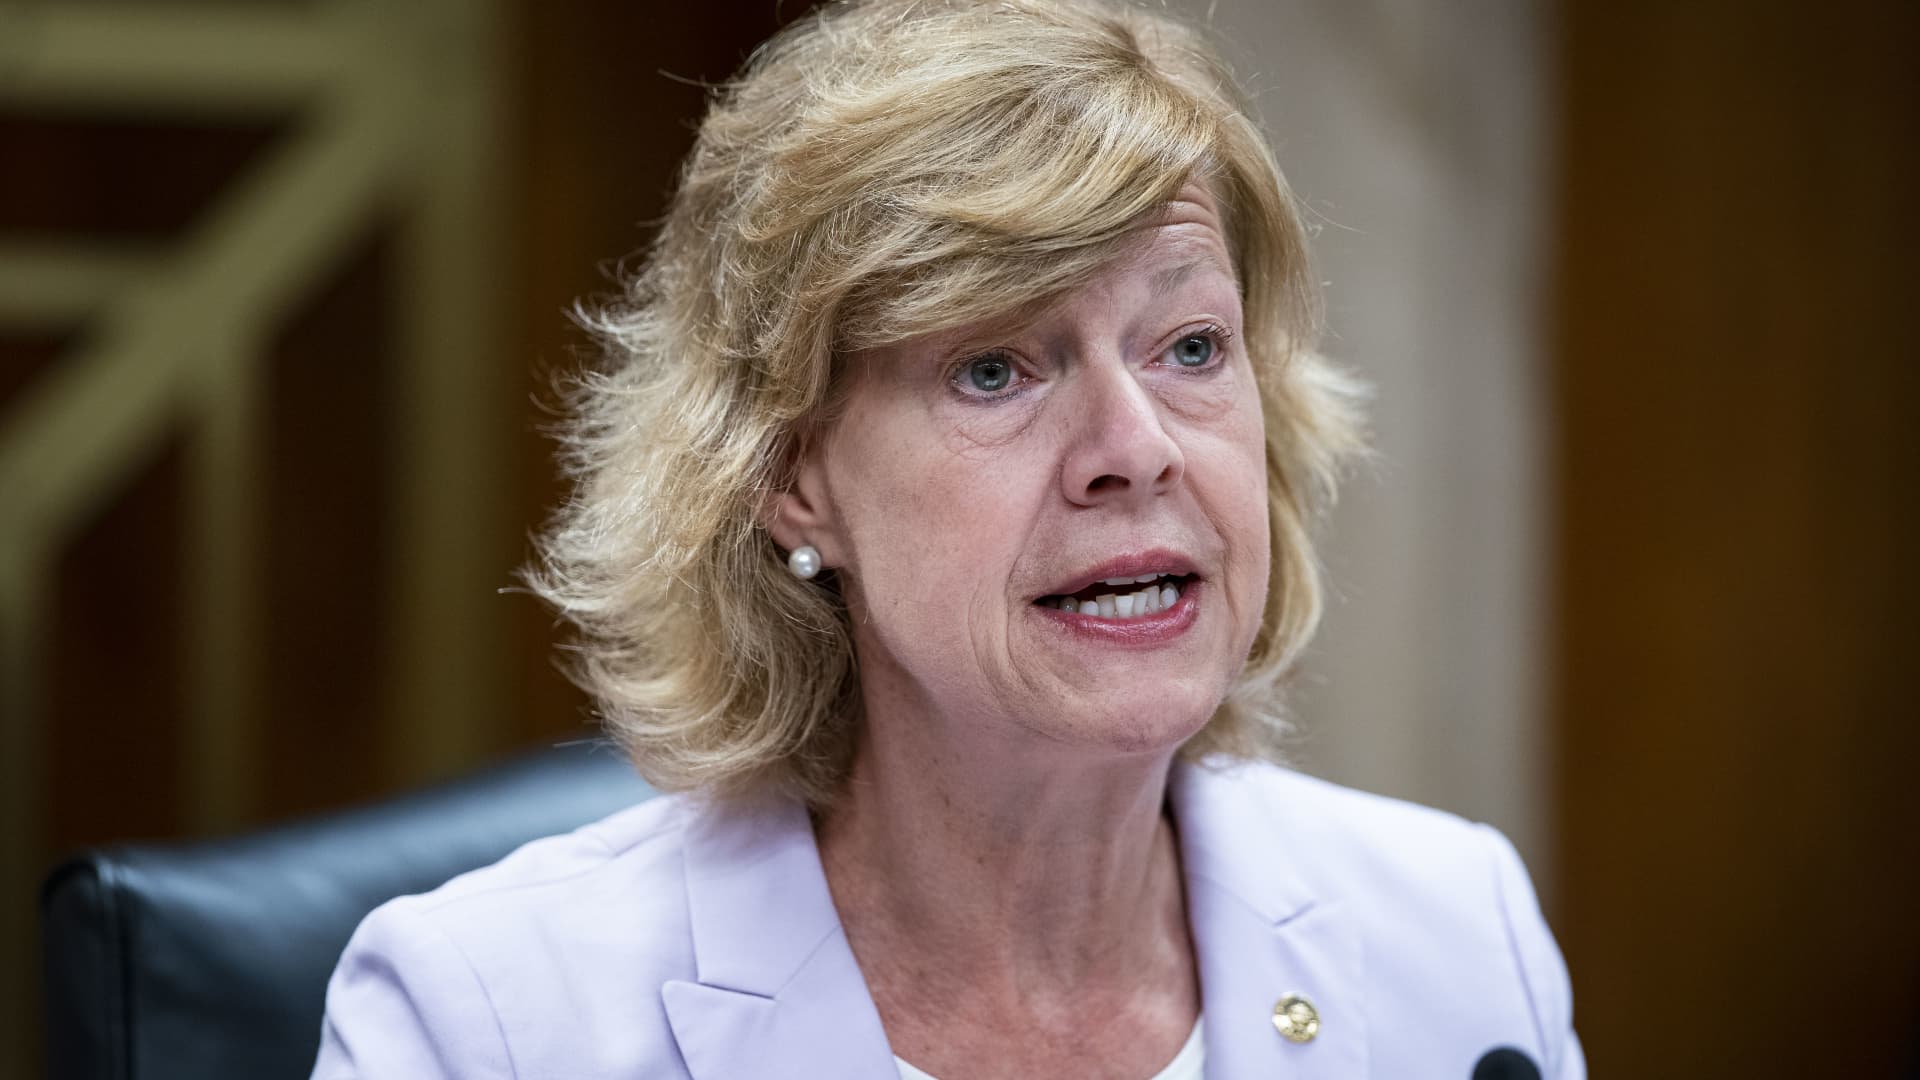 Senator Tammy Baldwin, a Democrat from Wisconsin and chair of the Senate Appropriations Subcommittee on Agriculture, Rural Development and U.S. Food and Drug Administration (FDA), speaks during a hearing in Washington, D.C., U.S., on Thursday, June 10, 2021.